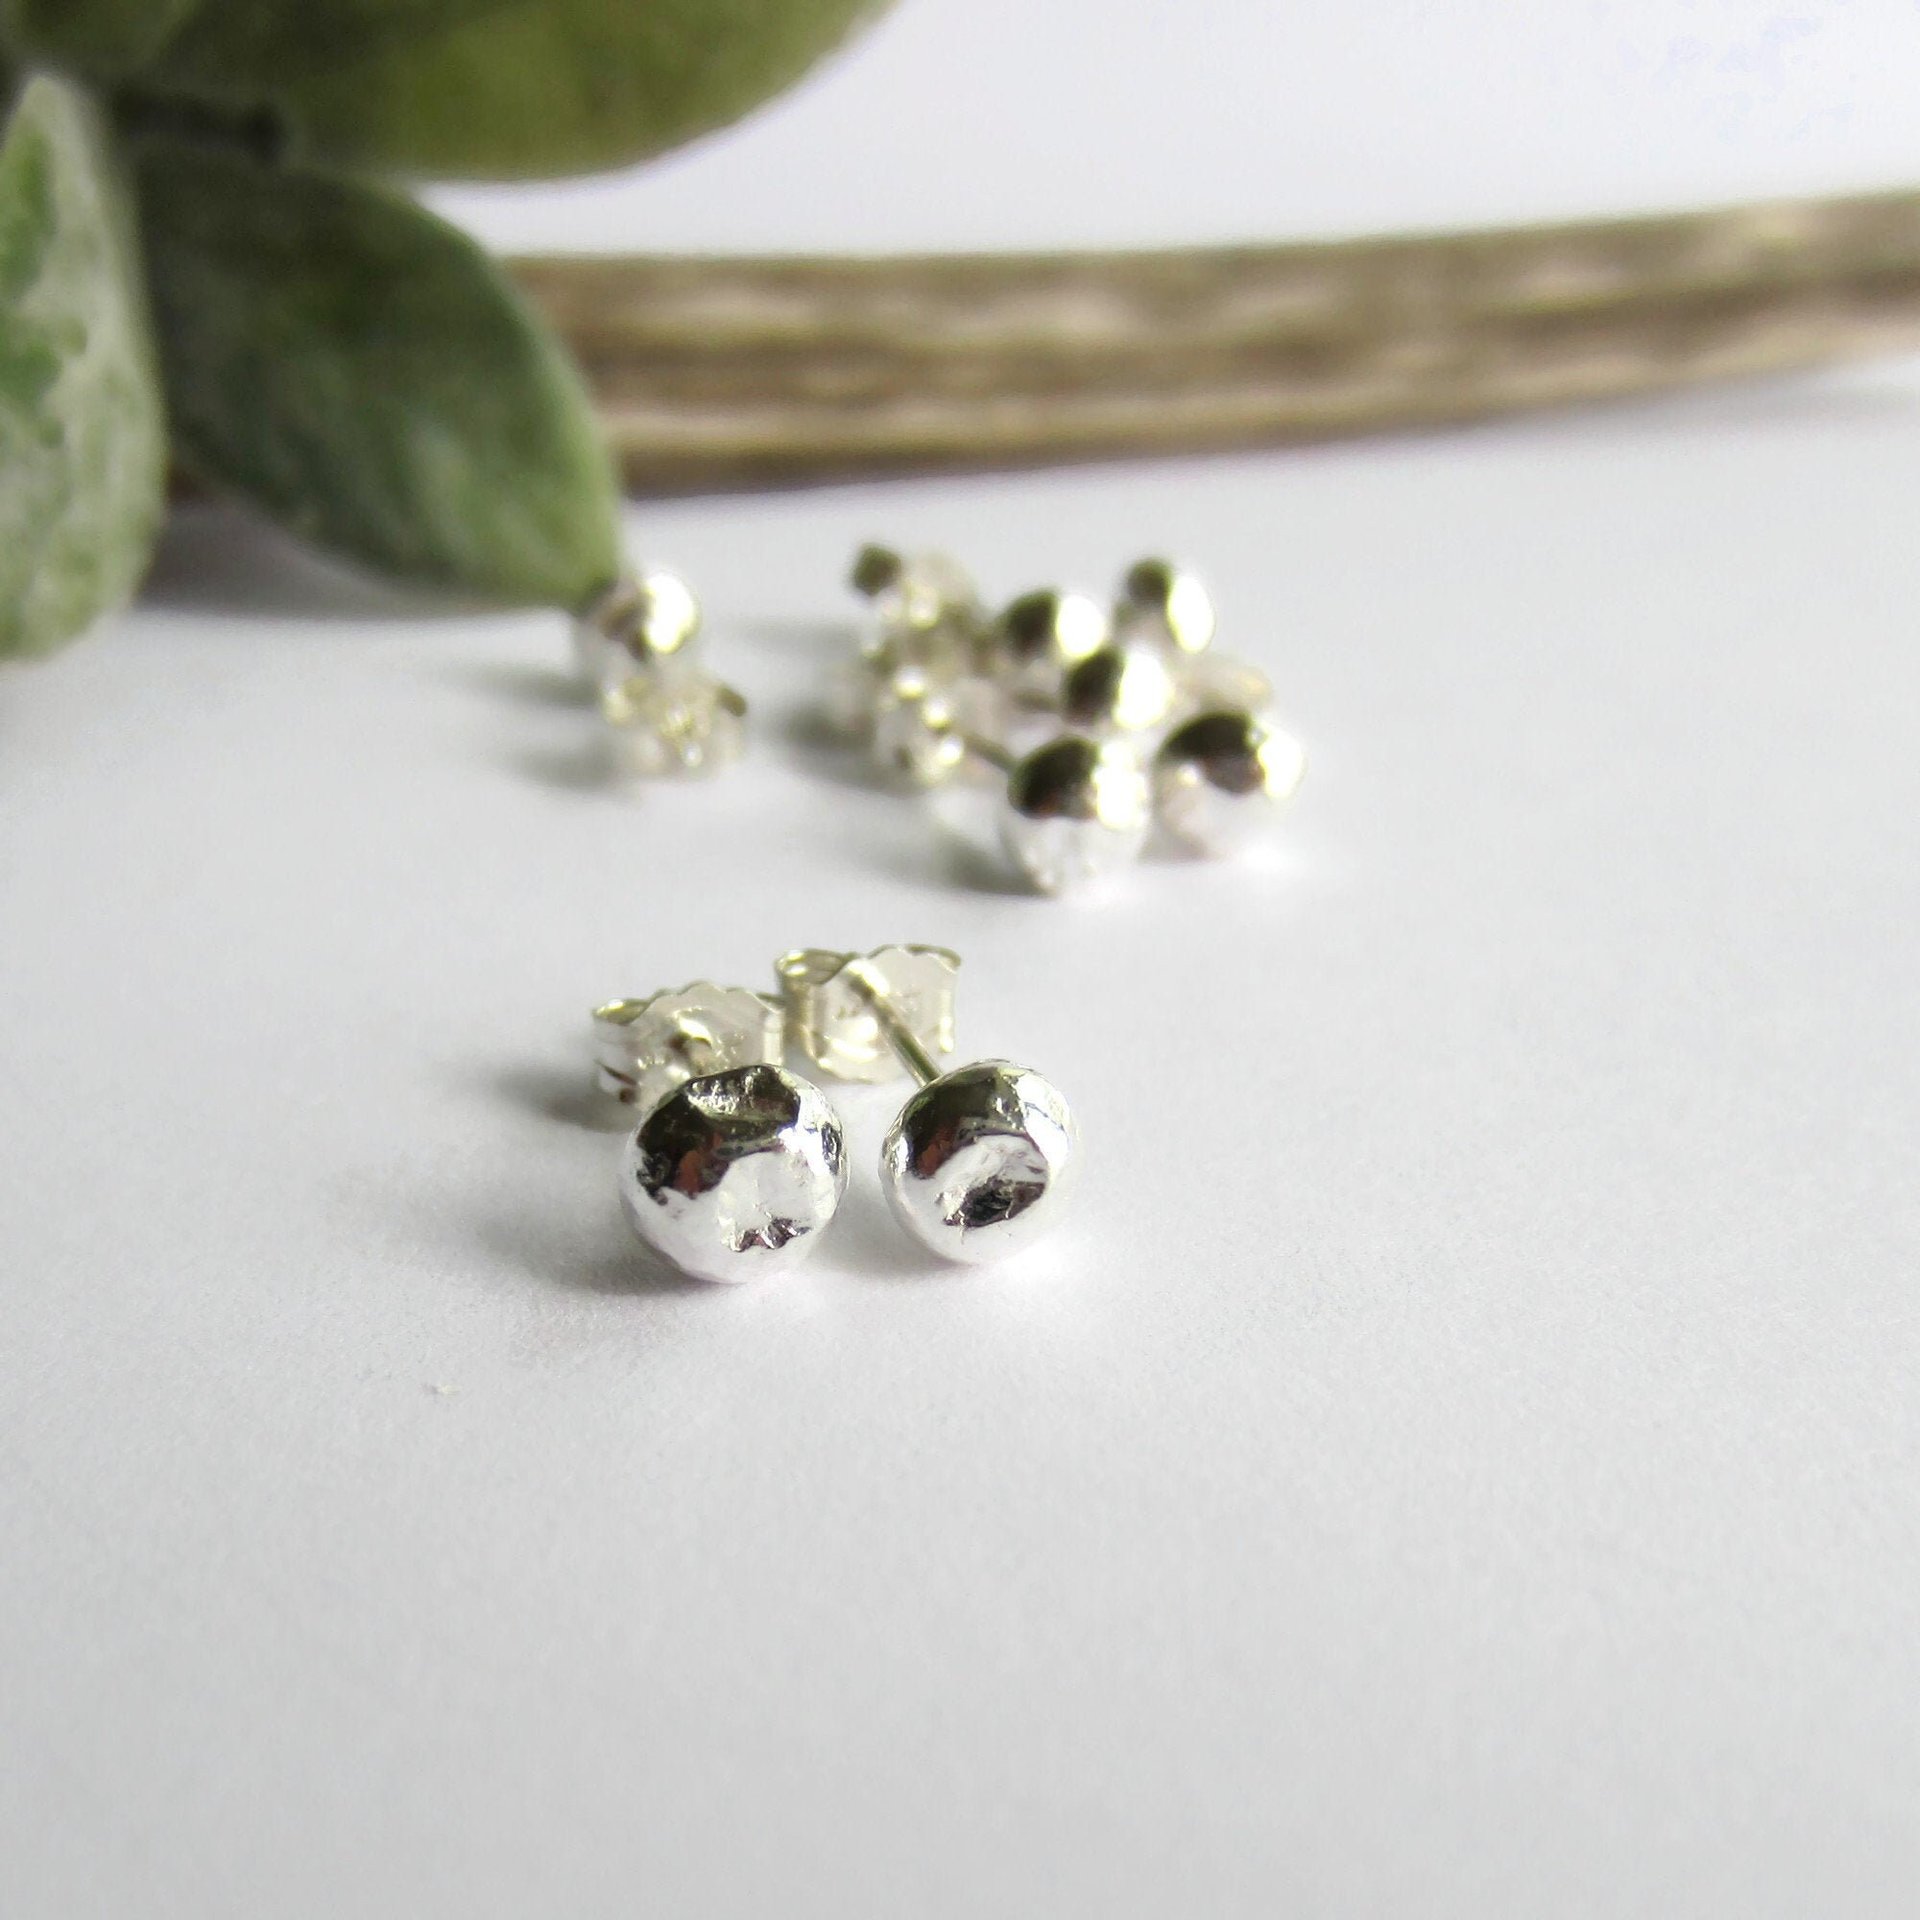 Recycled Sterling Silver Ball Stud Earrings - 6mm